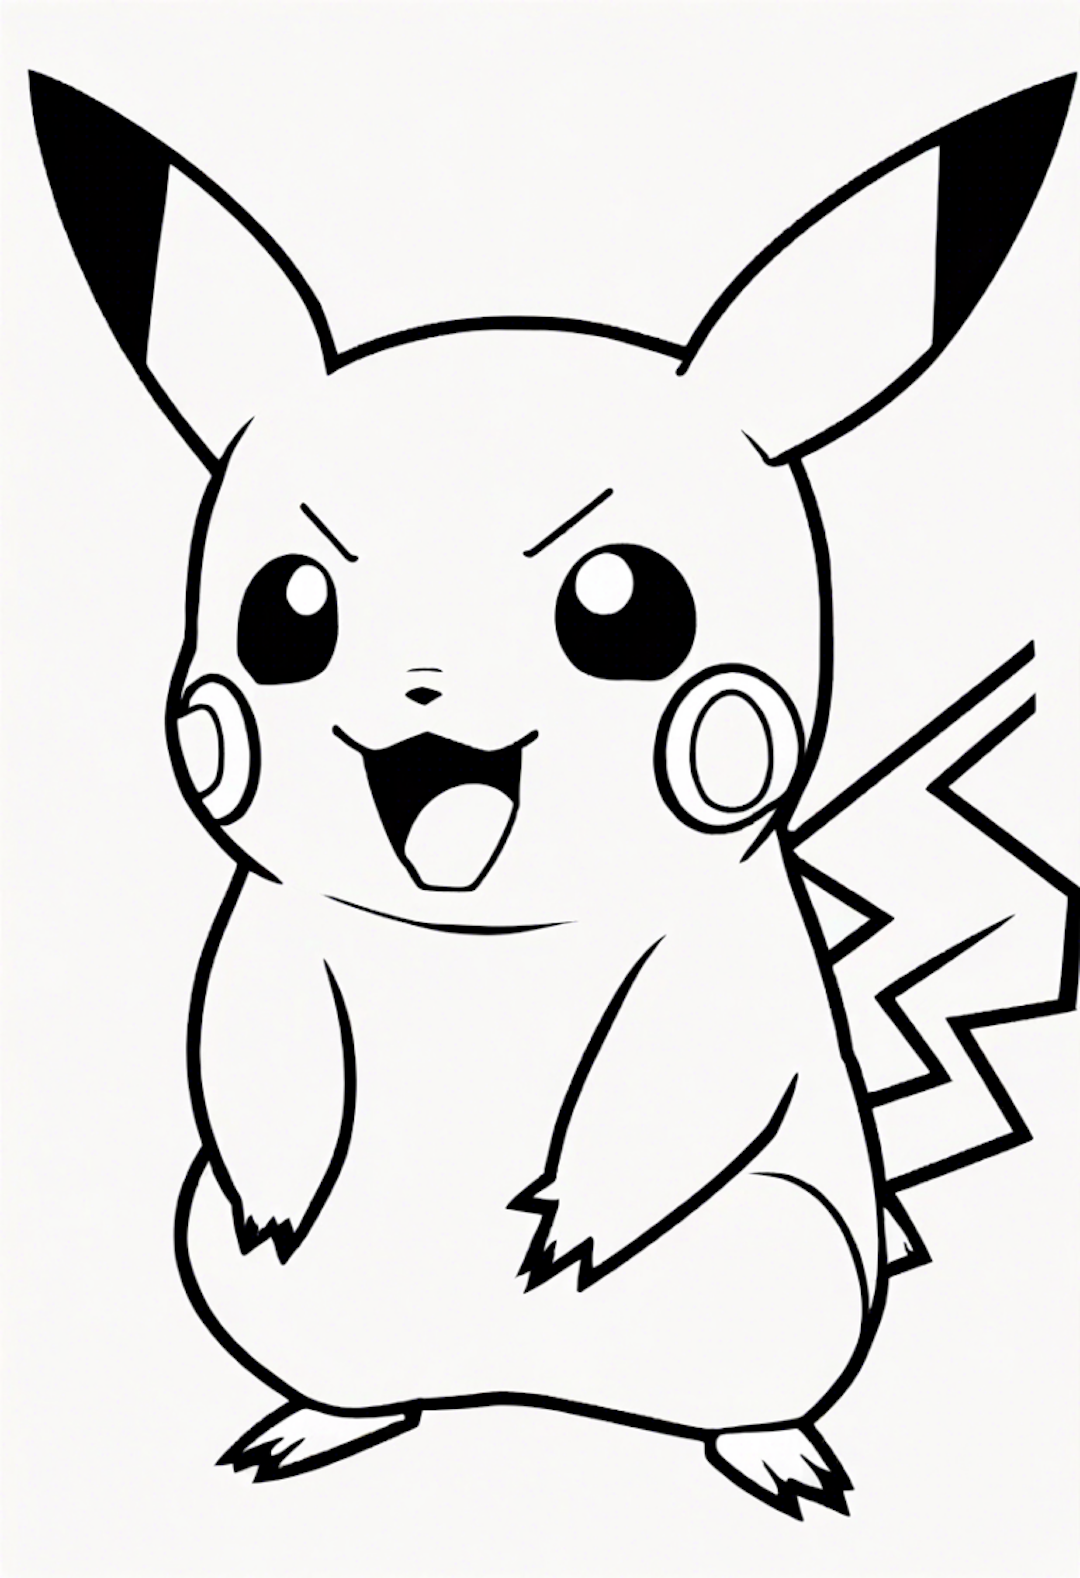 Pikachu’s Big Adventure Coloring Page coloring pages